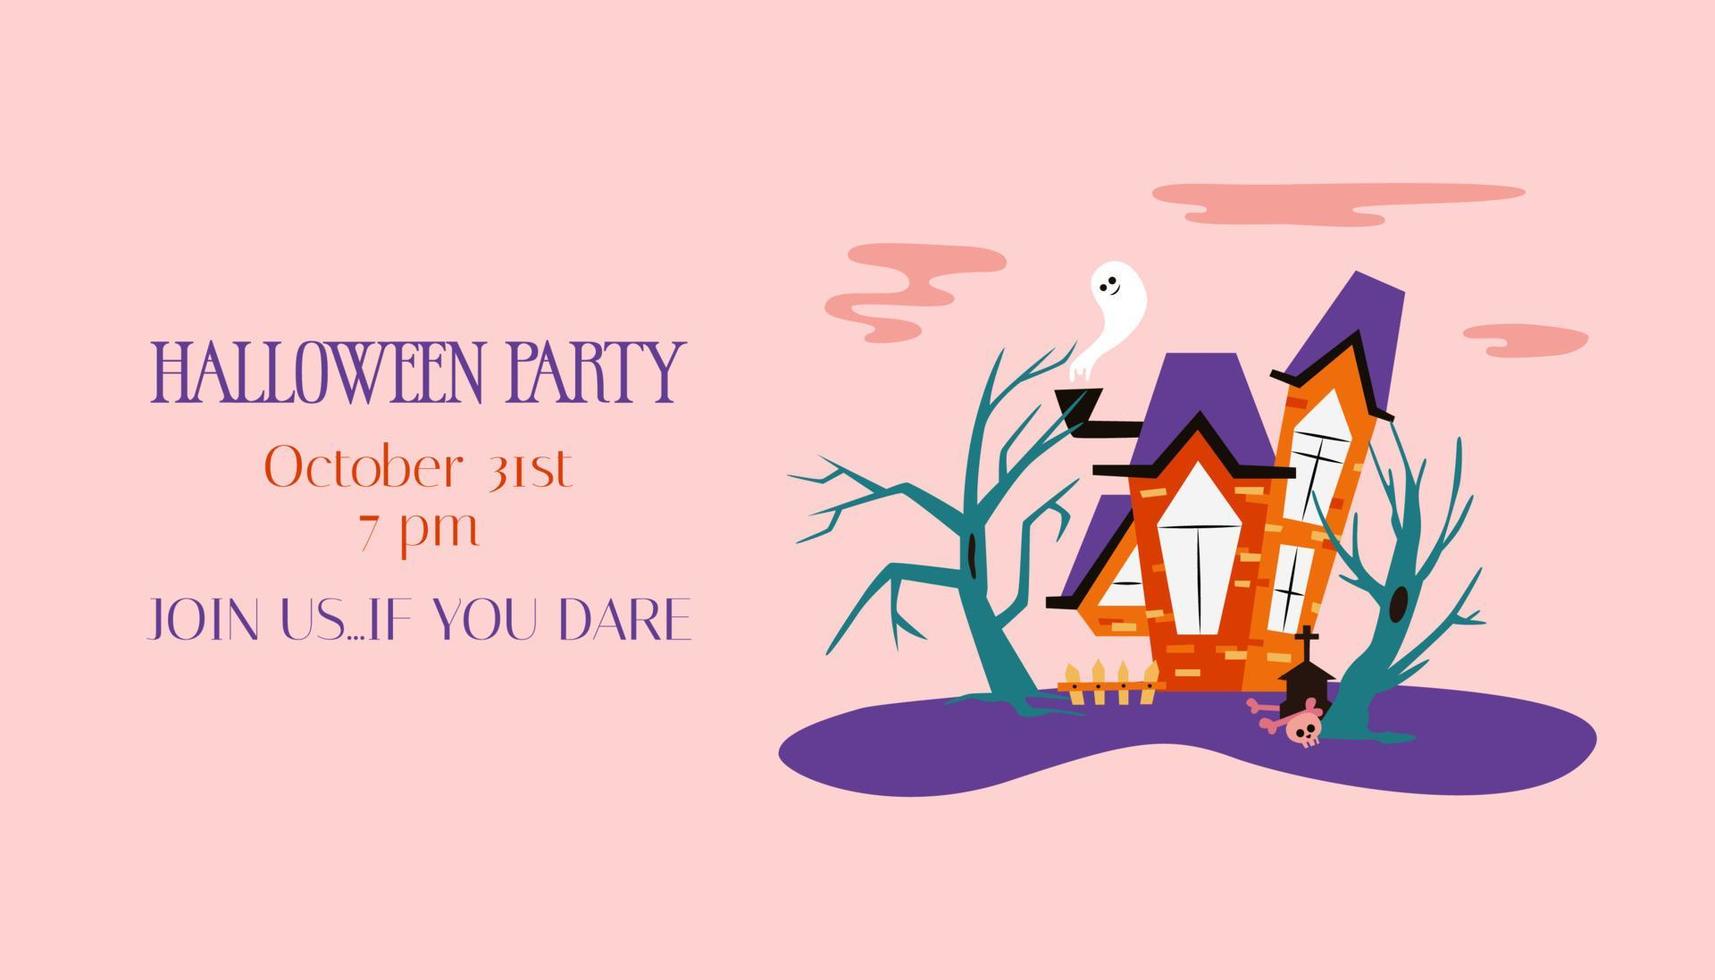 Halloween party intitation with haunted house. Spooky illustration of creepy trees, ghost and house with copy space vector